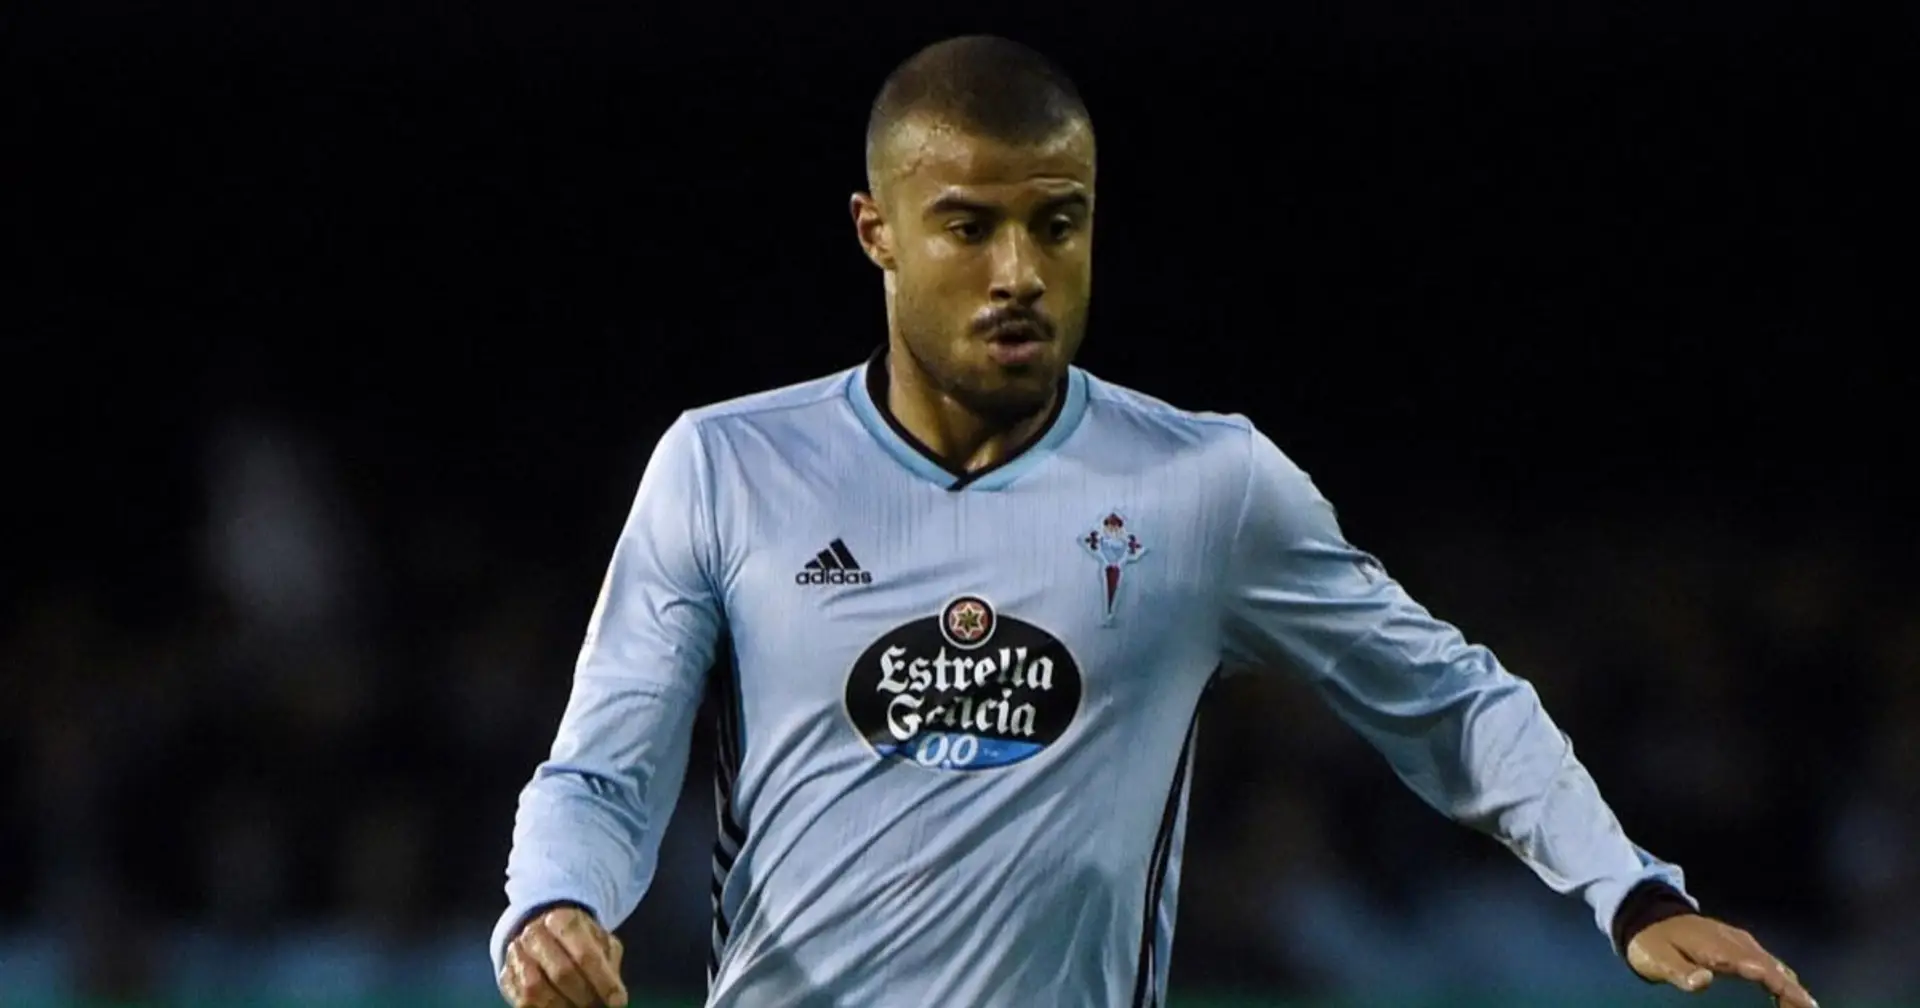 Celta rumoured ready to buy Rafinha but player would prefer Serie A or Premier League move